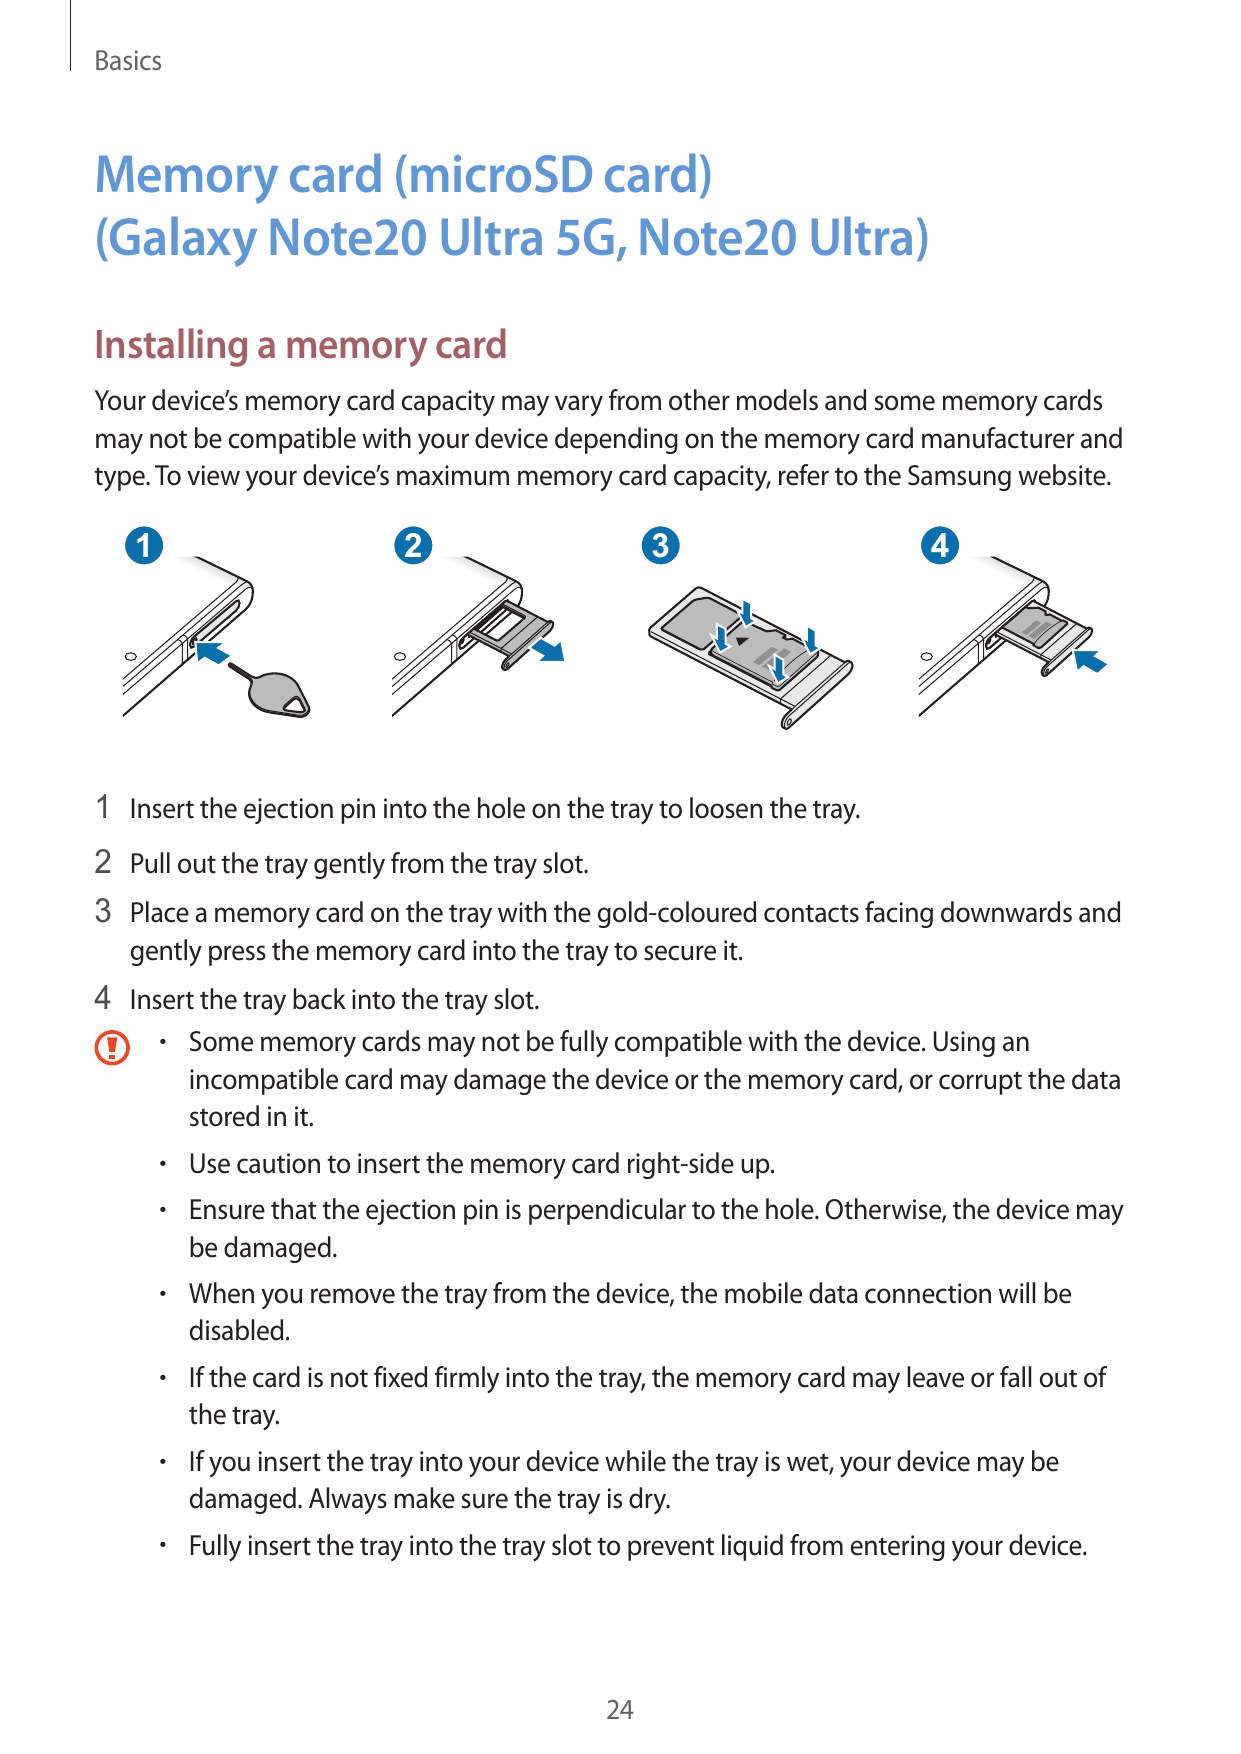 BasicsMemory card (microSD card)(Galaxy Note20 Ultra 5G, Note20 Ultra)Installing a memory cardYour device’s memory card capacity